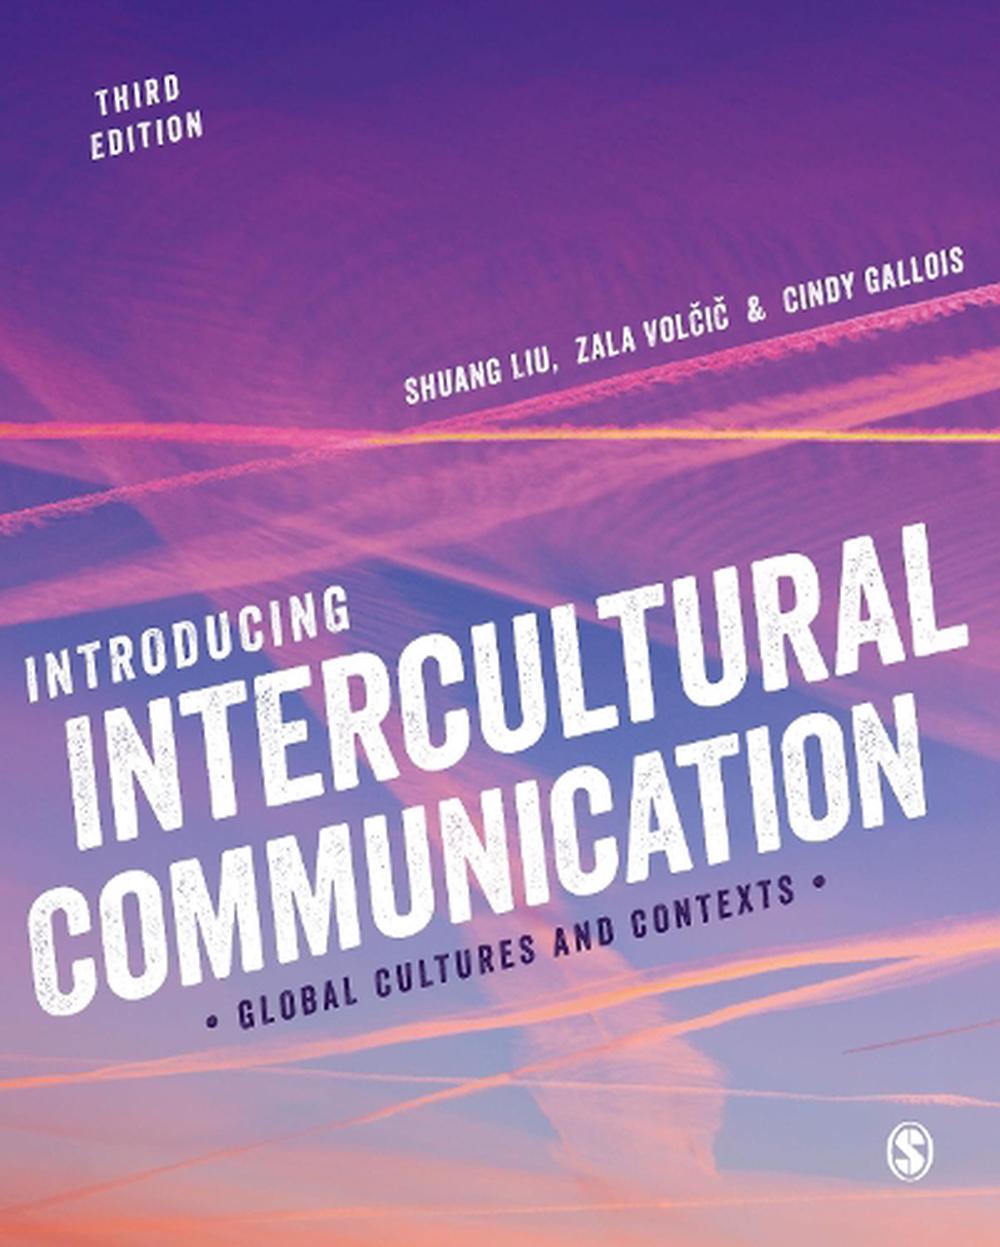 intercultural communication in contexts 8th edition